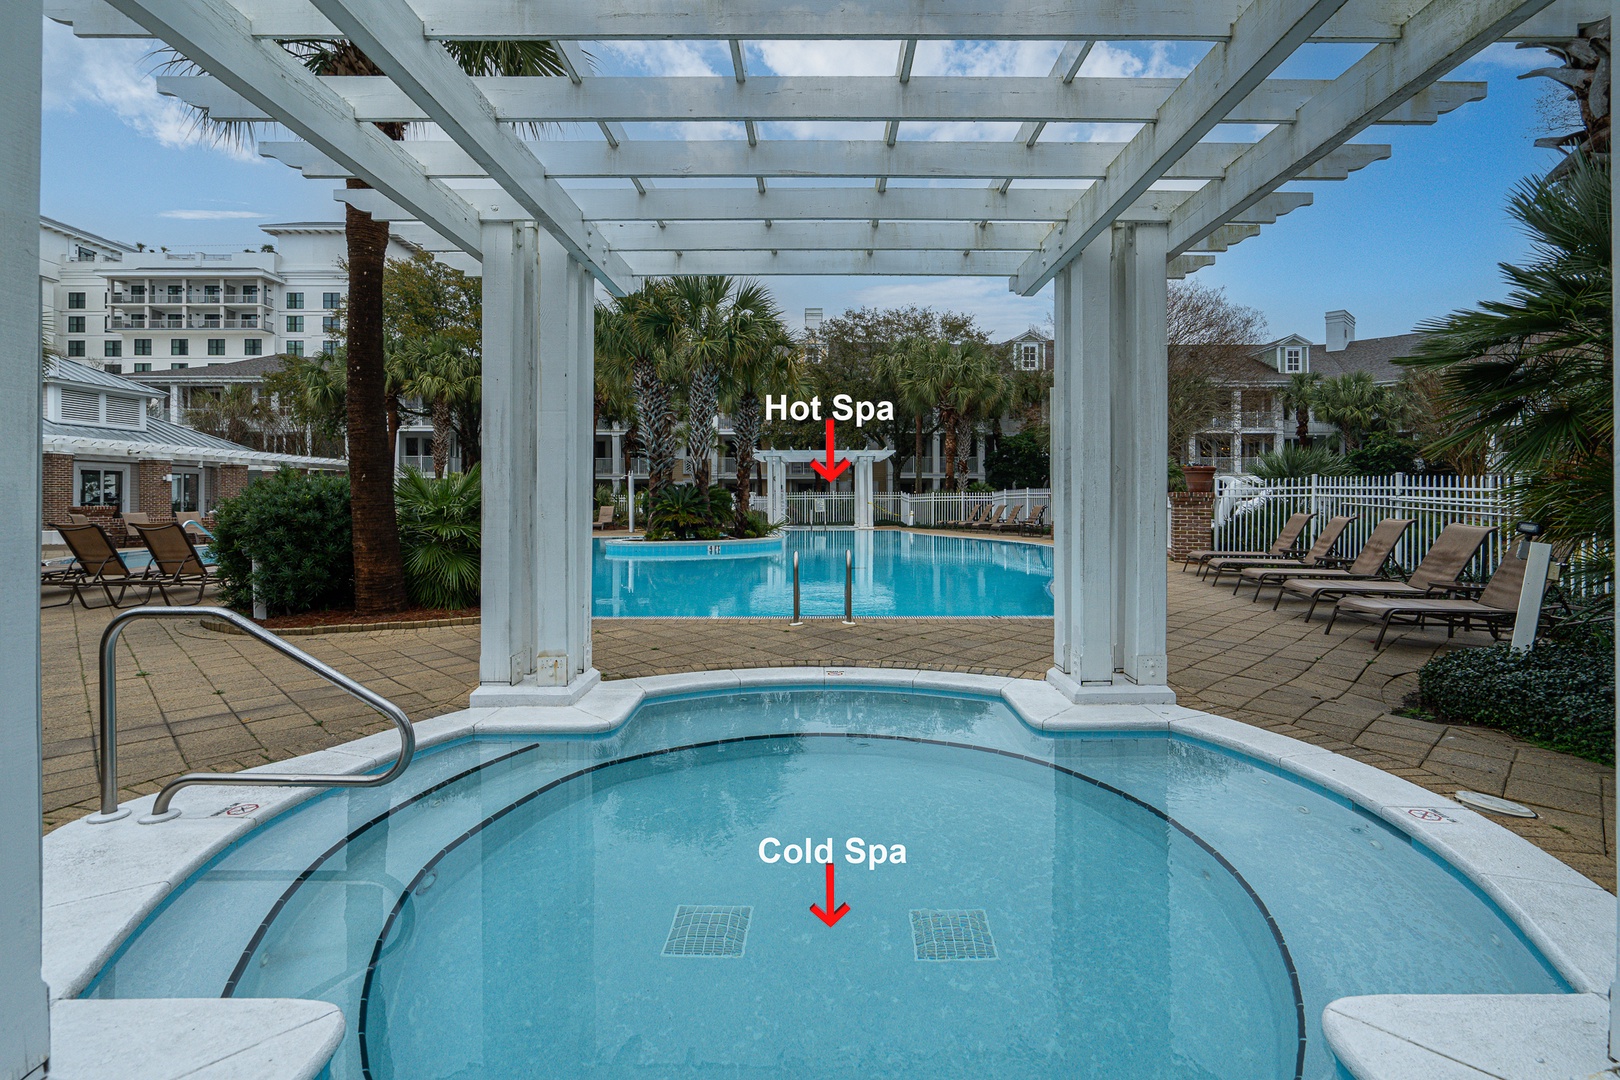 Lounge the day or make a splash at the sparkling communal pool